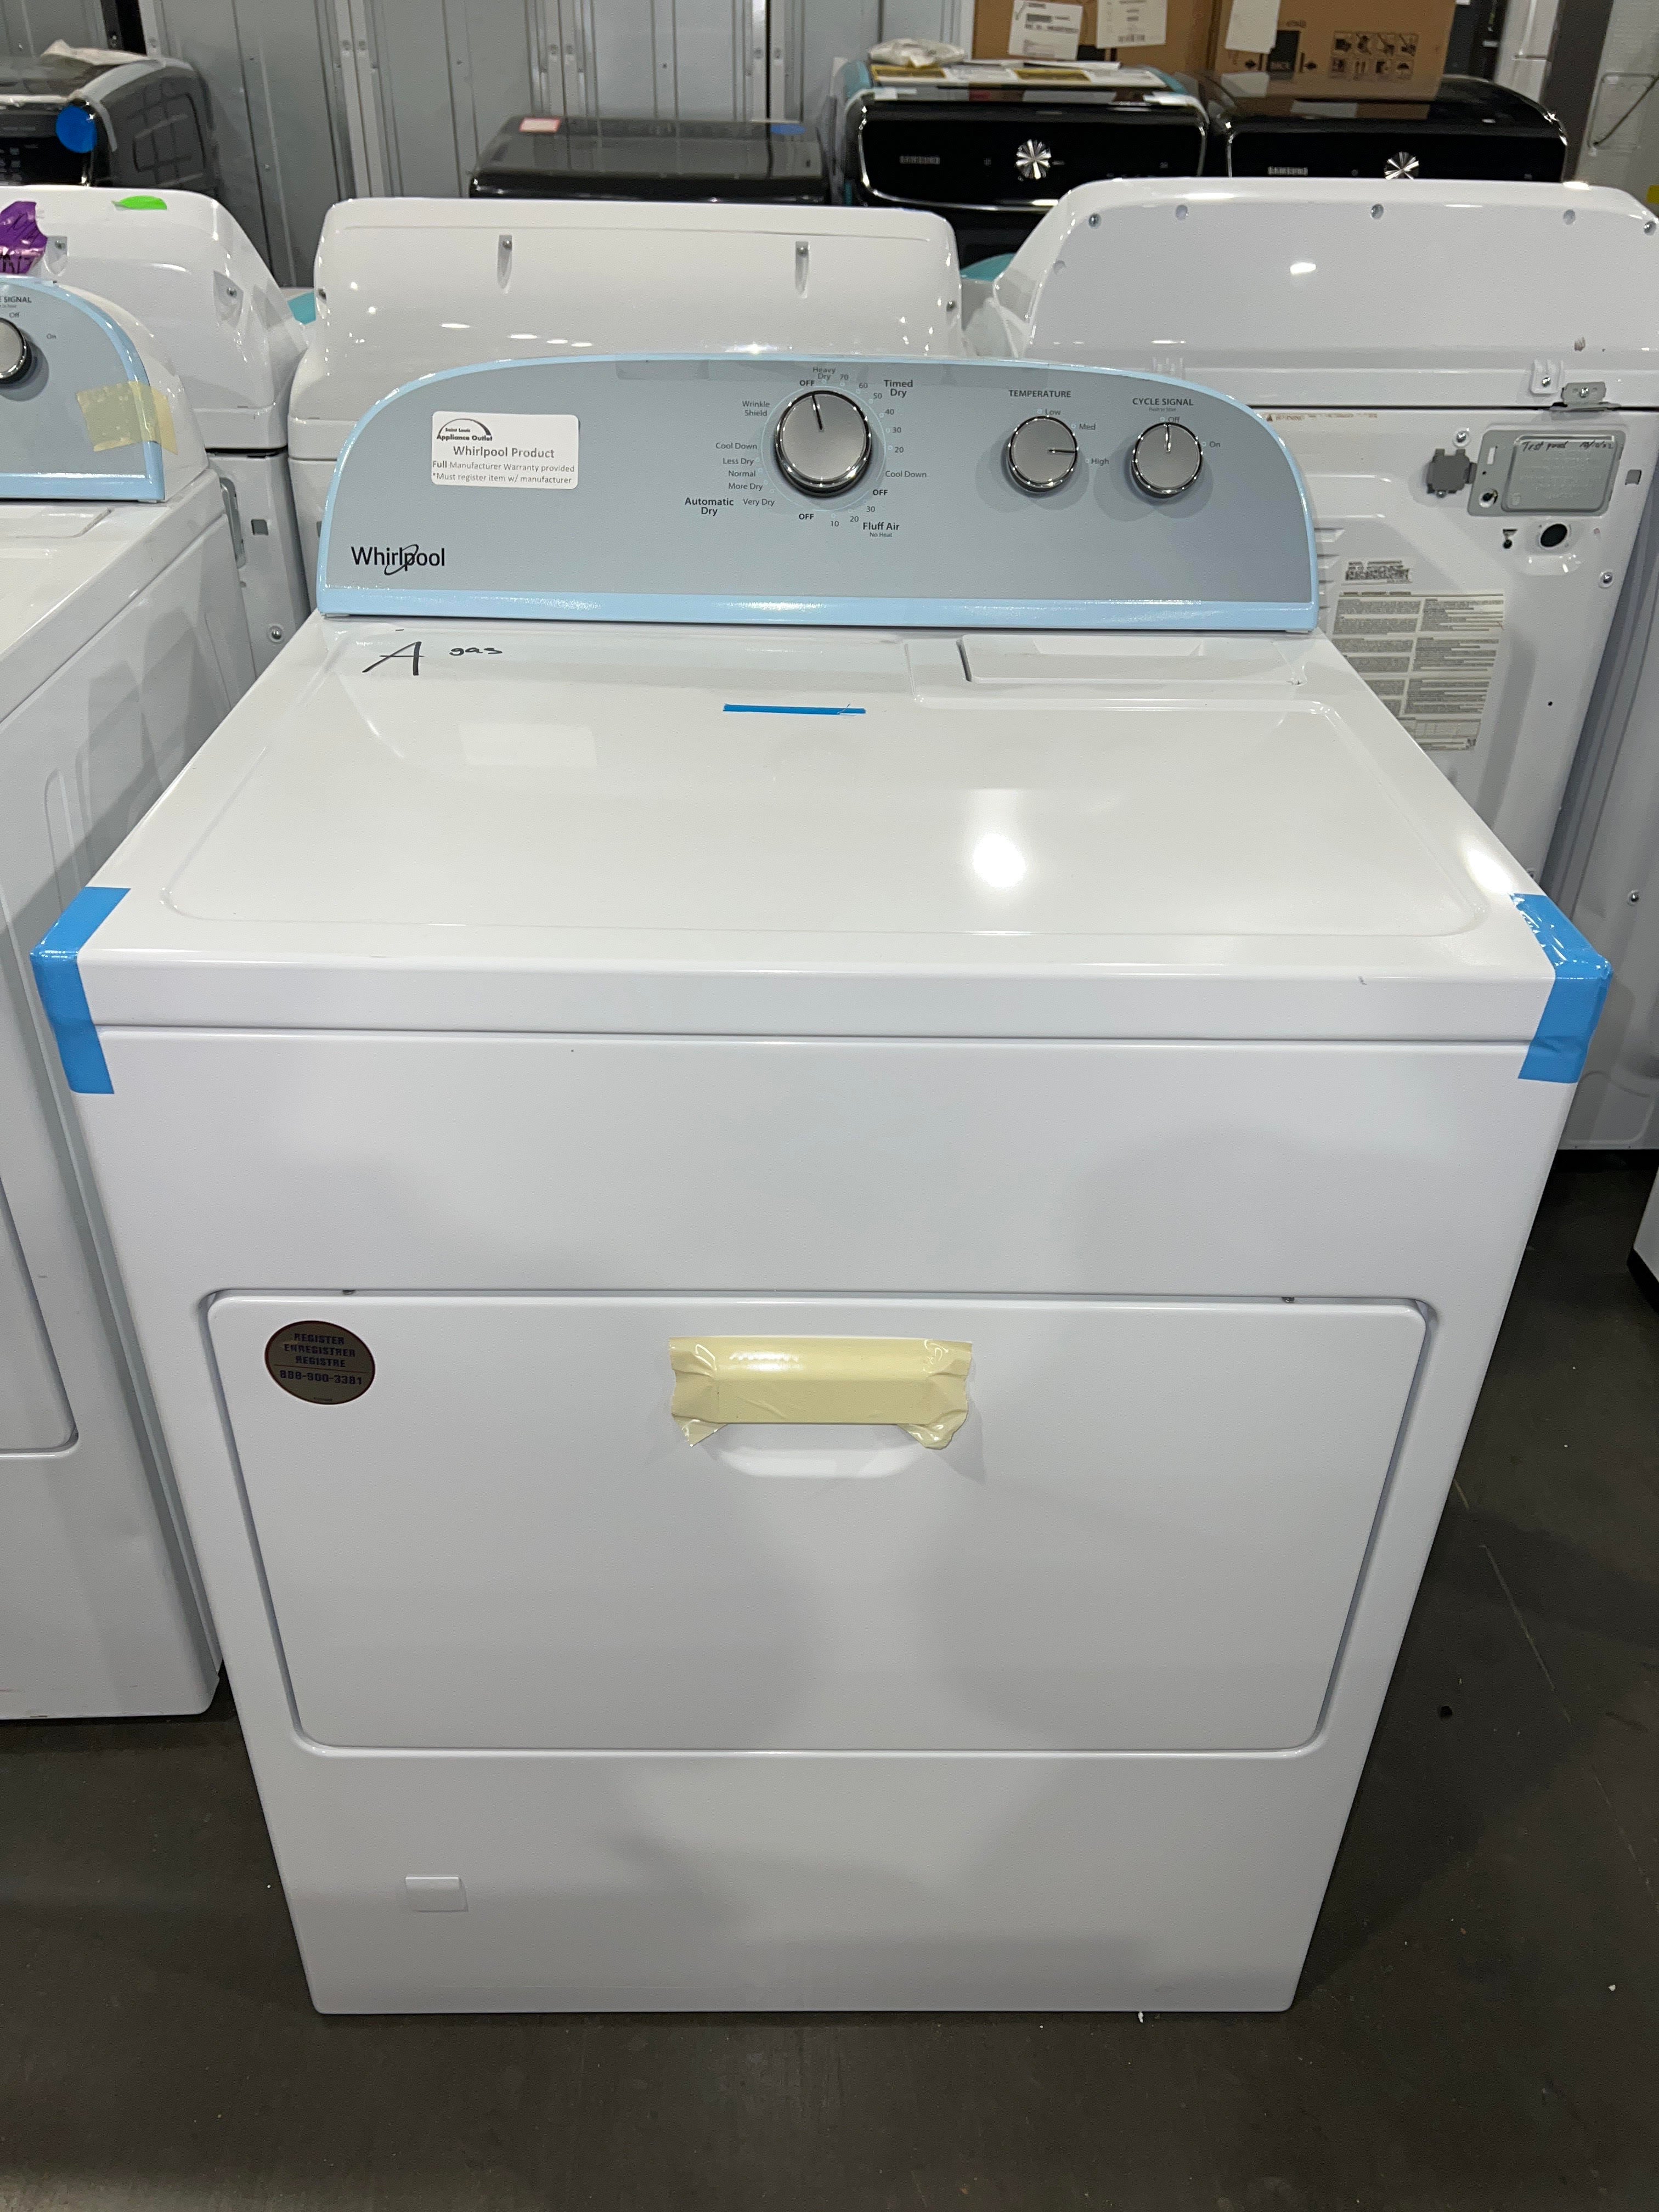 Whirlpool 7.0 cu. ft. Top Load Gas Dryer with AutoDry? Drying System (WGD4950HW)